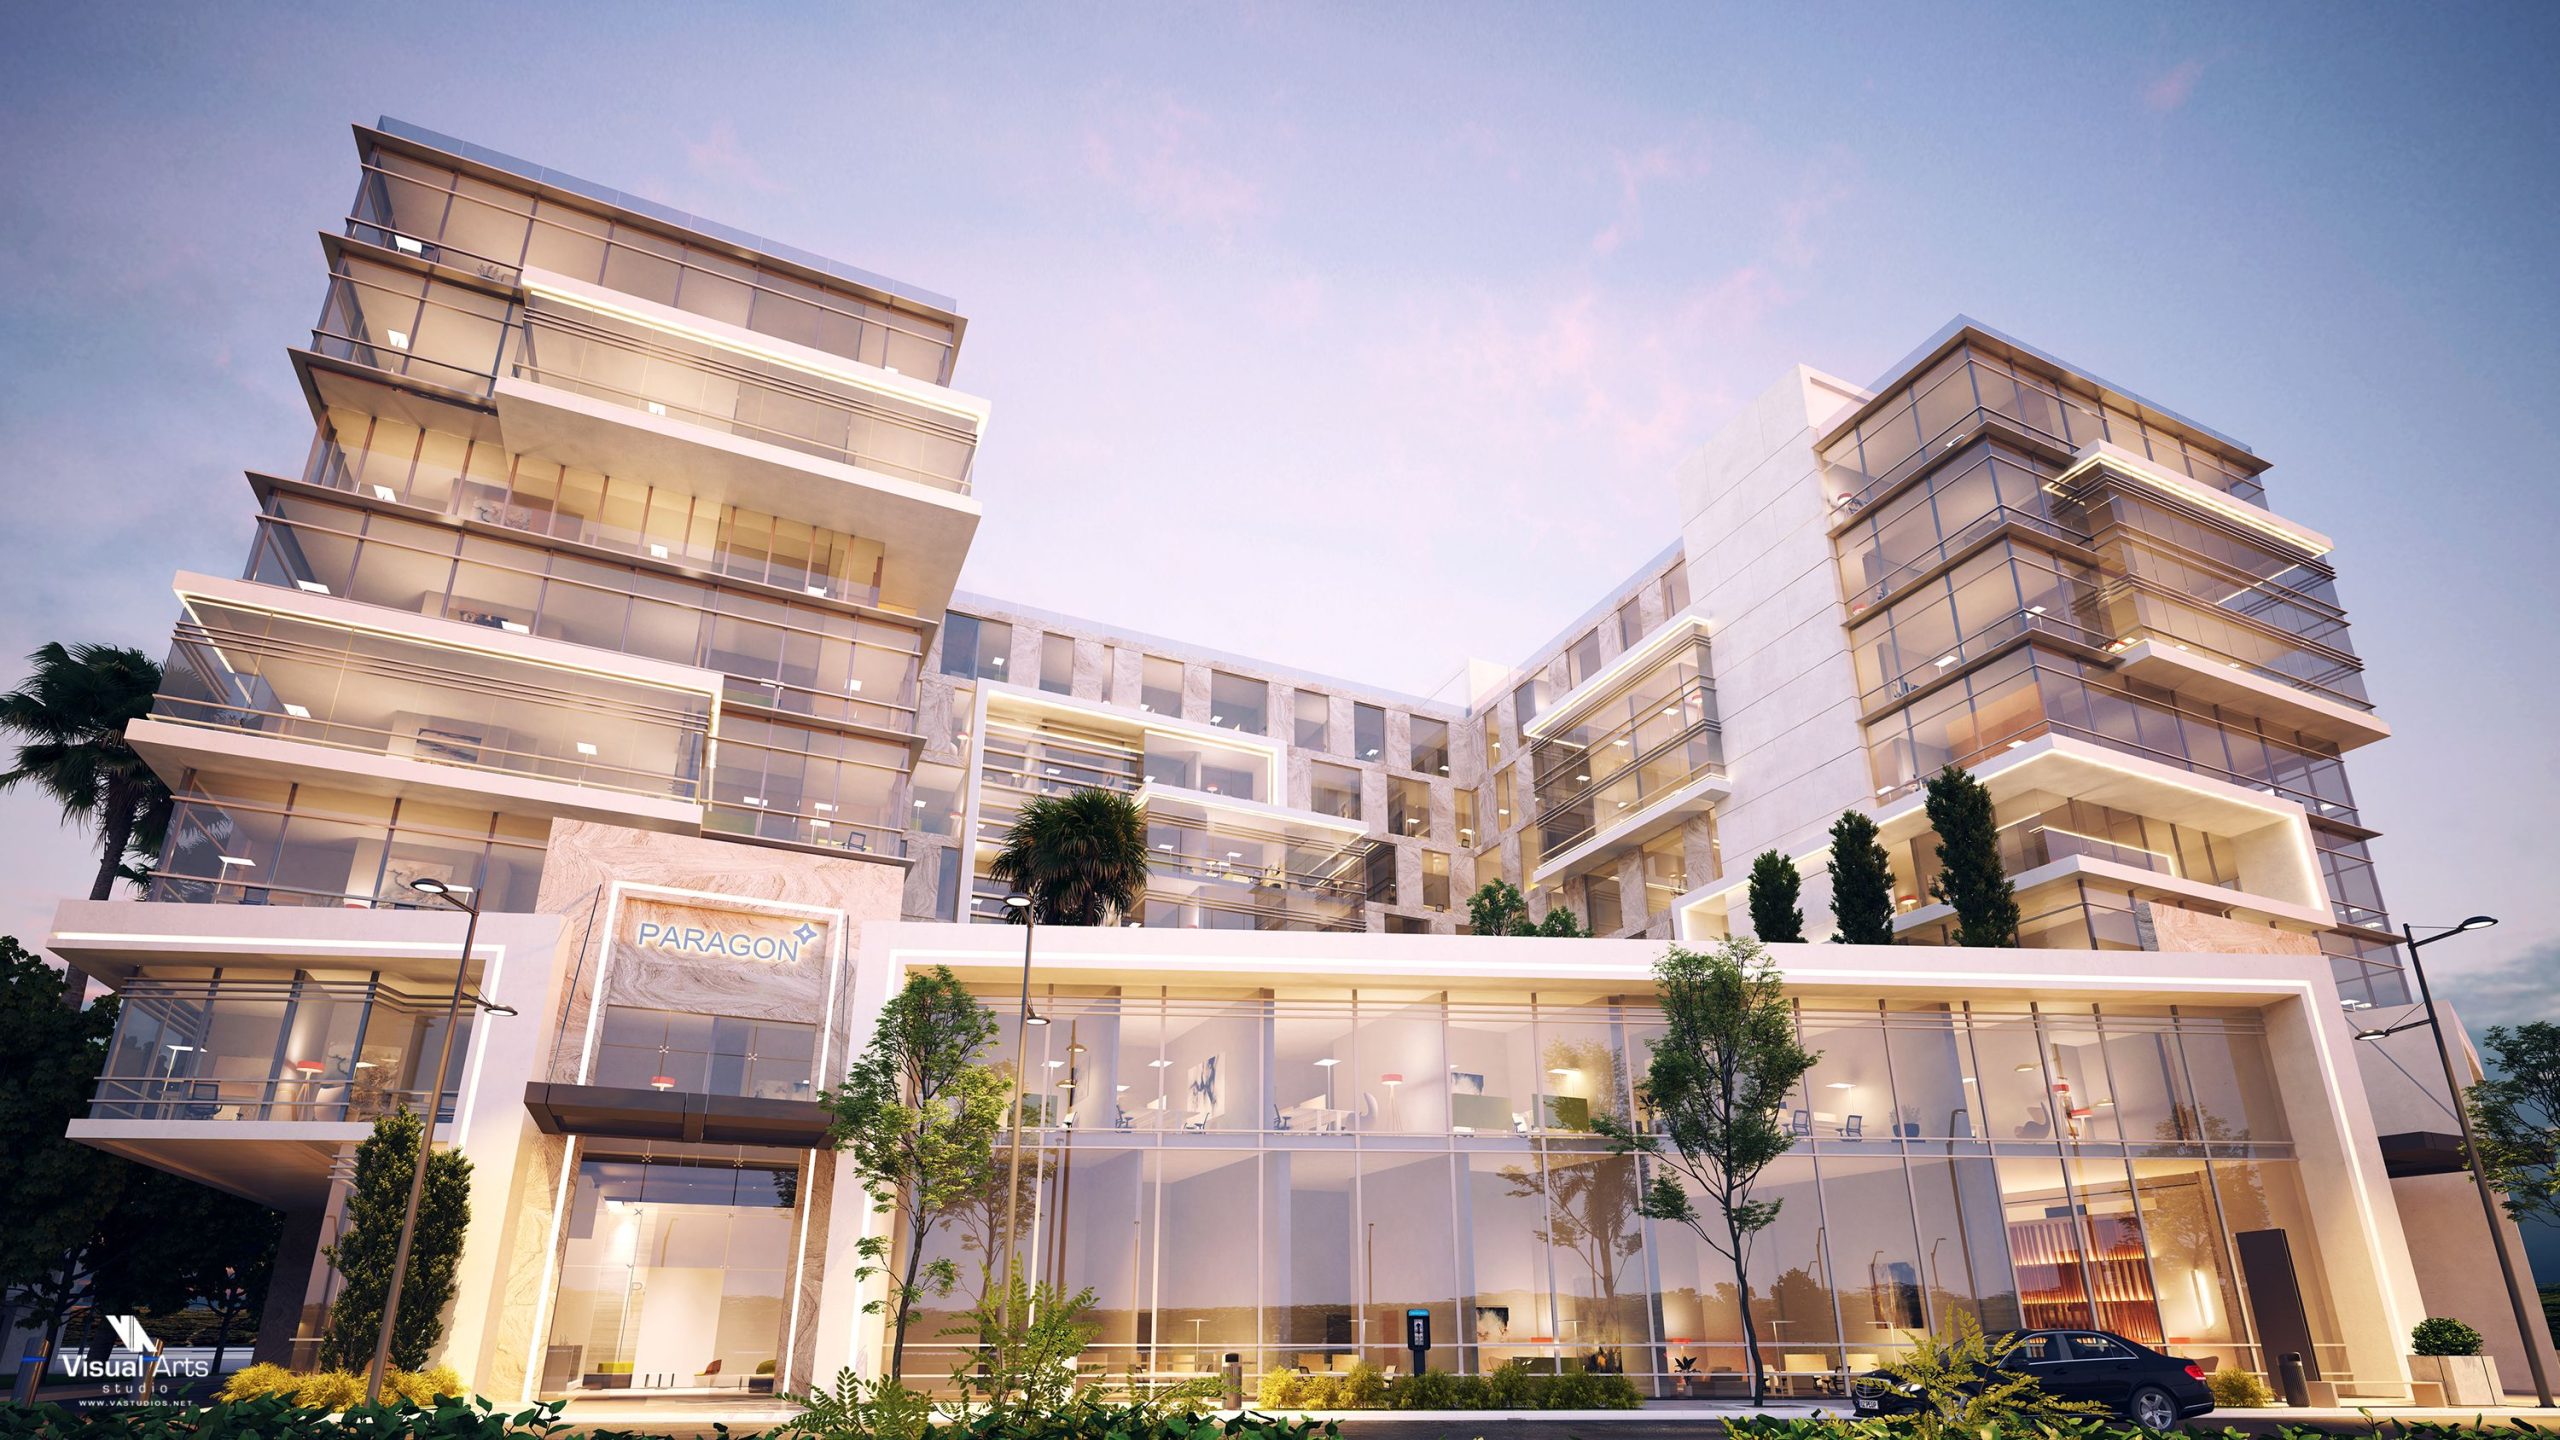 Administrative units for sale in Paragon Mall Project